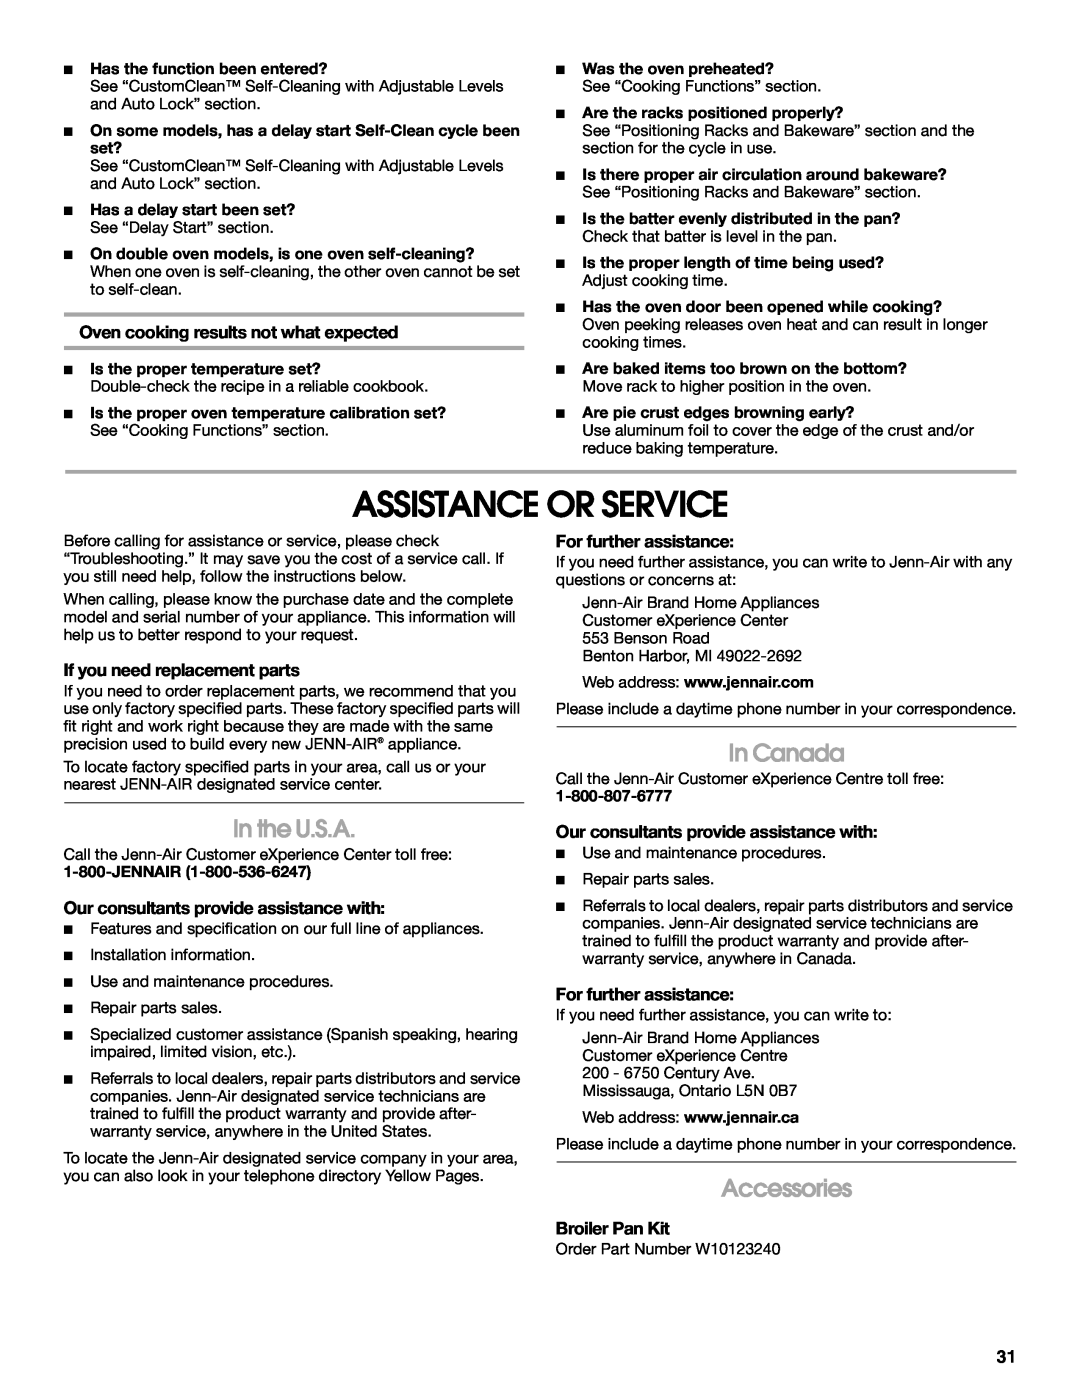 Jenn-Air JMW3430 manual Assistance Or Service, In the U.S.A, In Canada, Accessories, Oven cooking results not what expected 